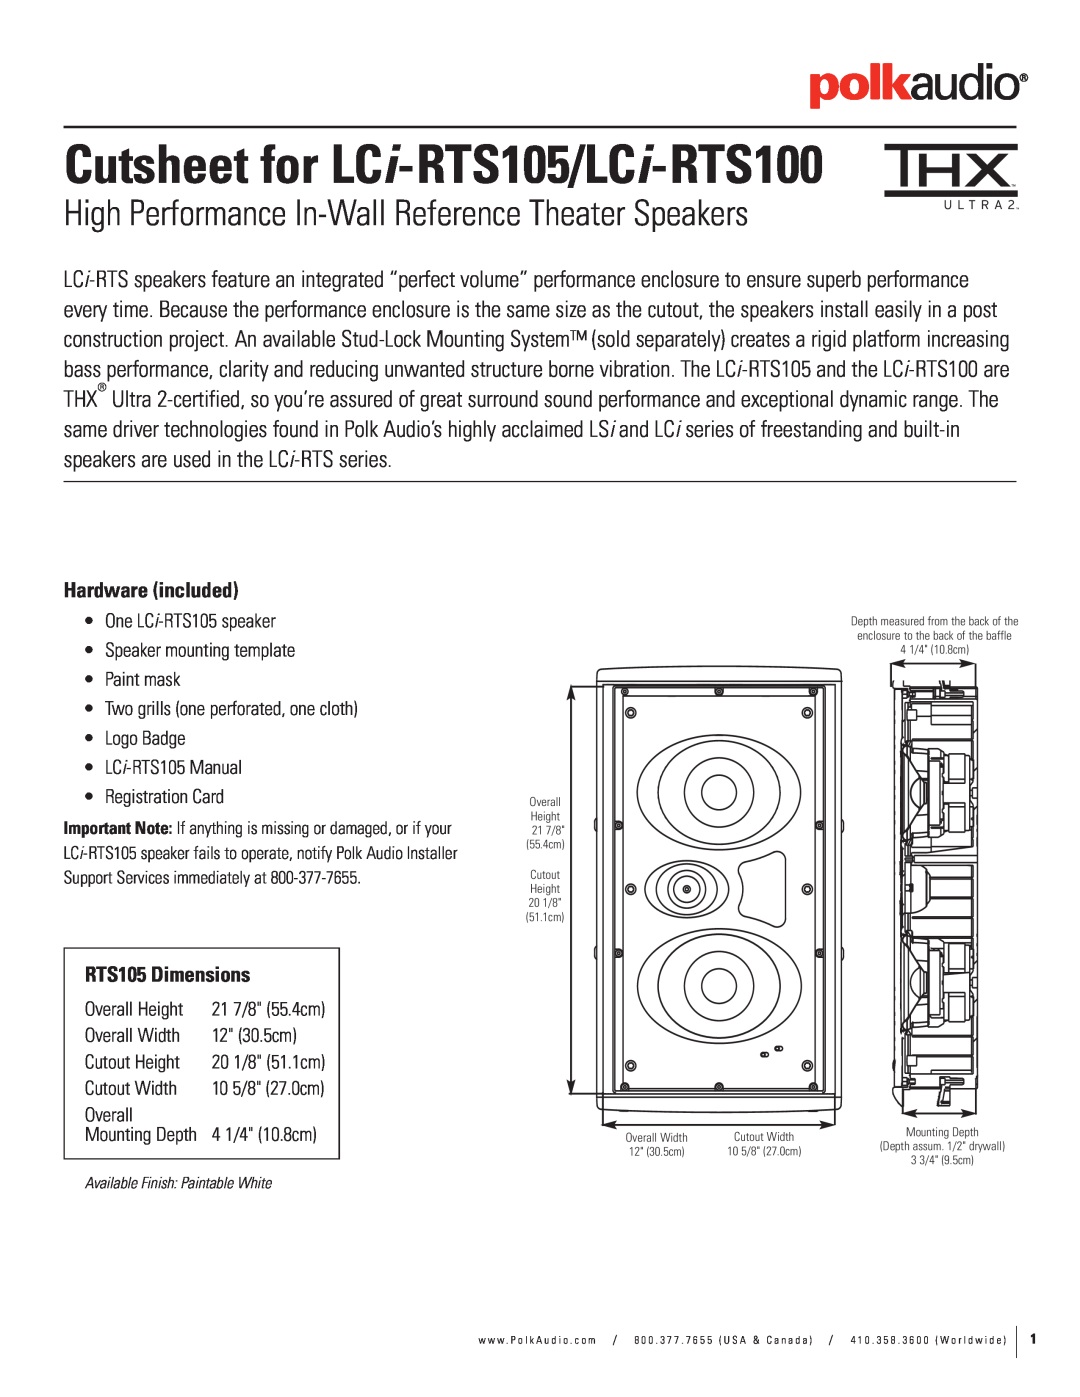 Polk Audio dimensions Hardware included, RTS105 Dimensions, Cutsheet for LCi-RTS105/LCi-RTS100 